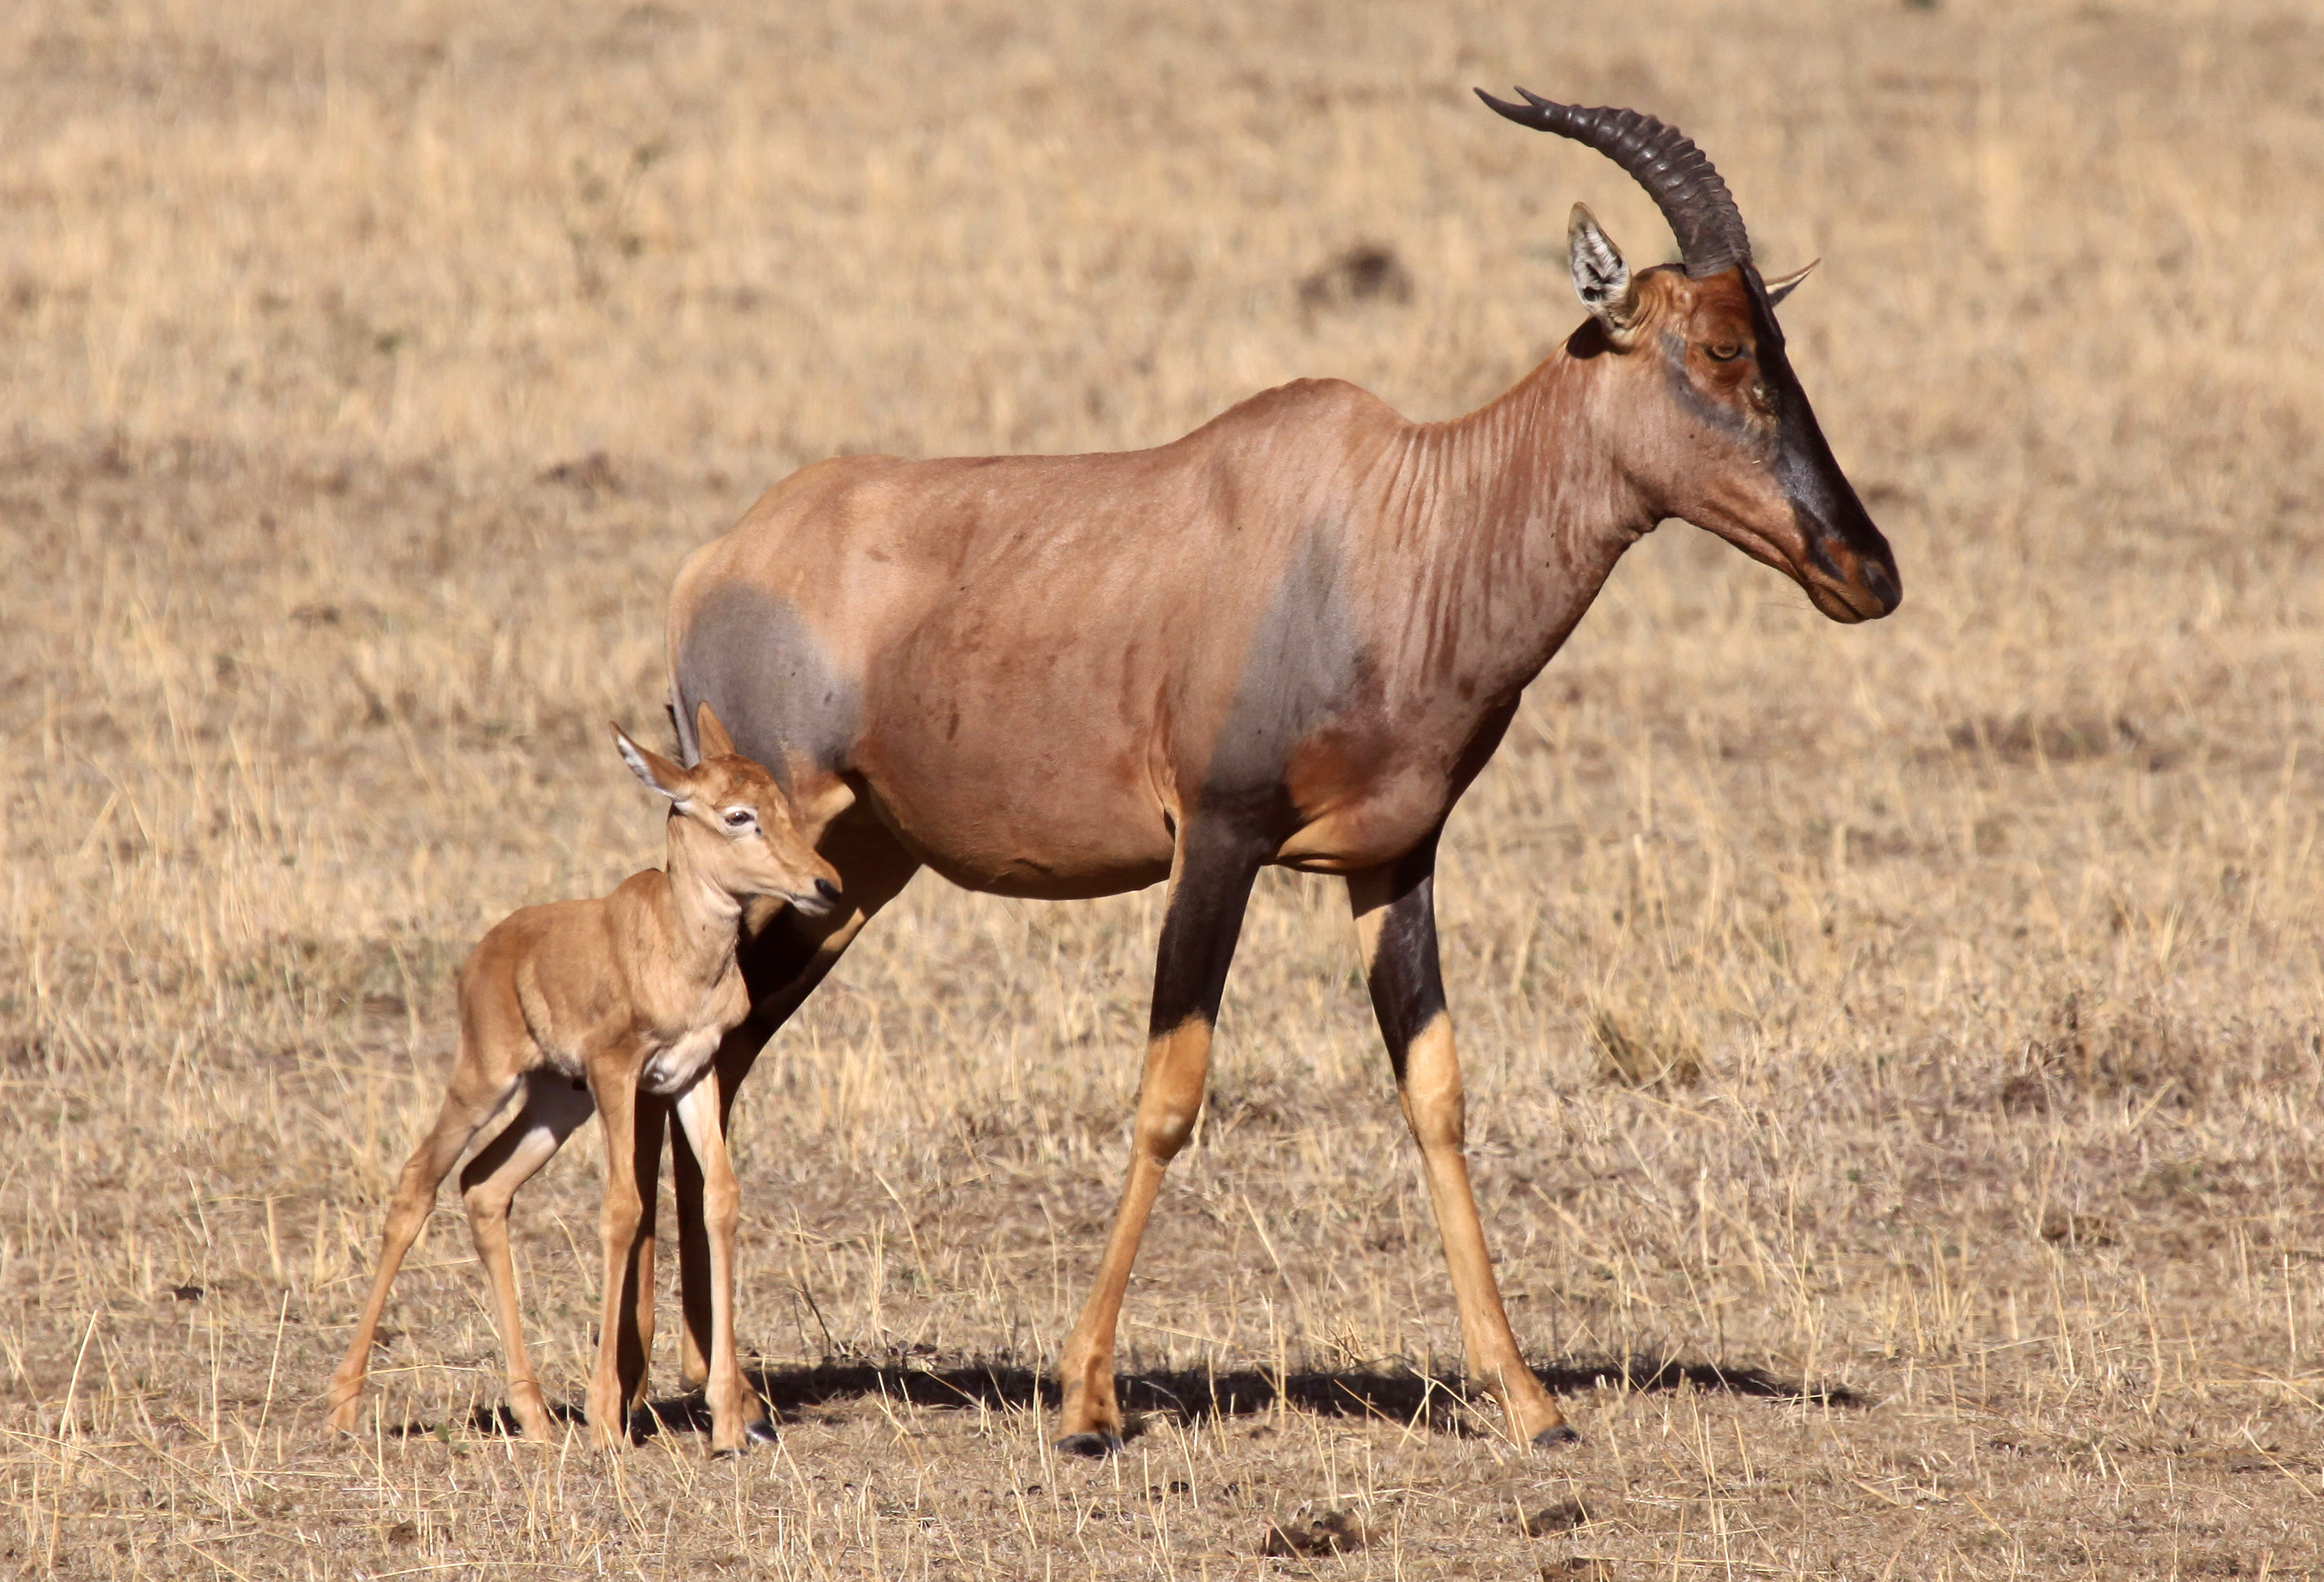 Topis are a highly social and fast antelope species.